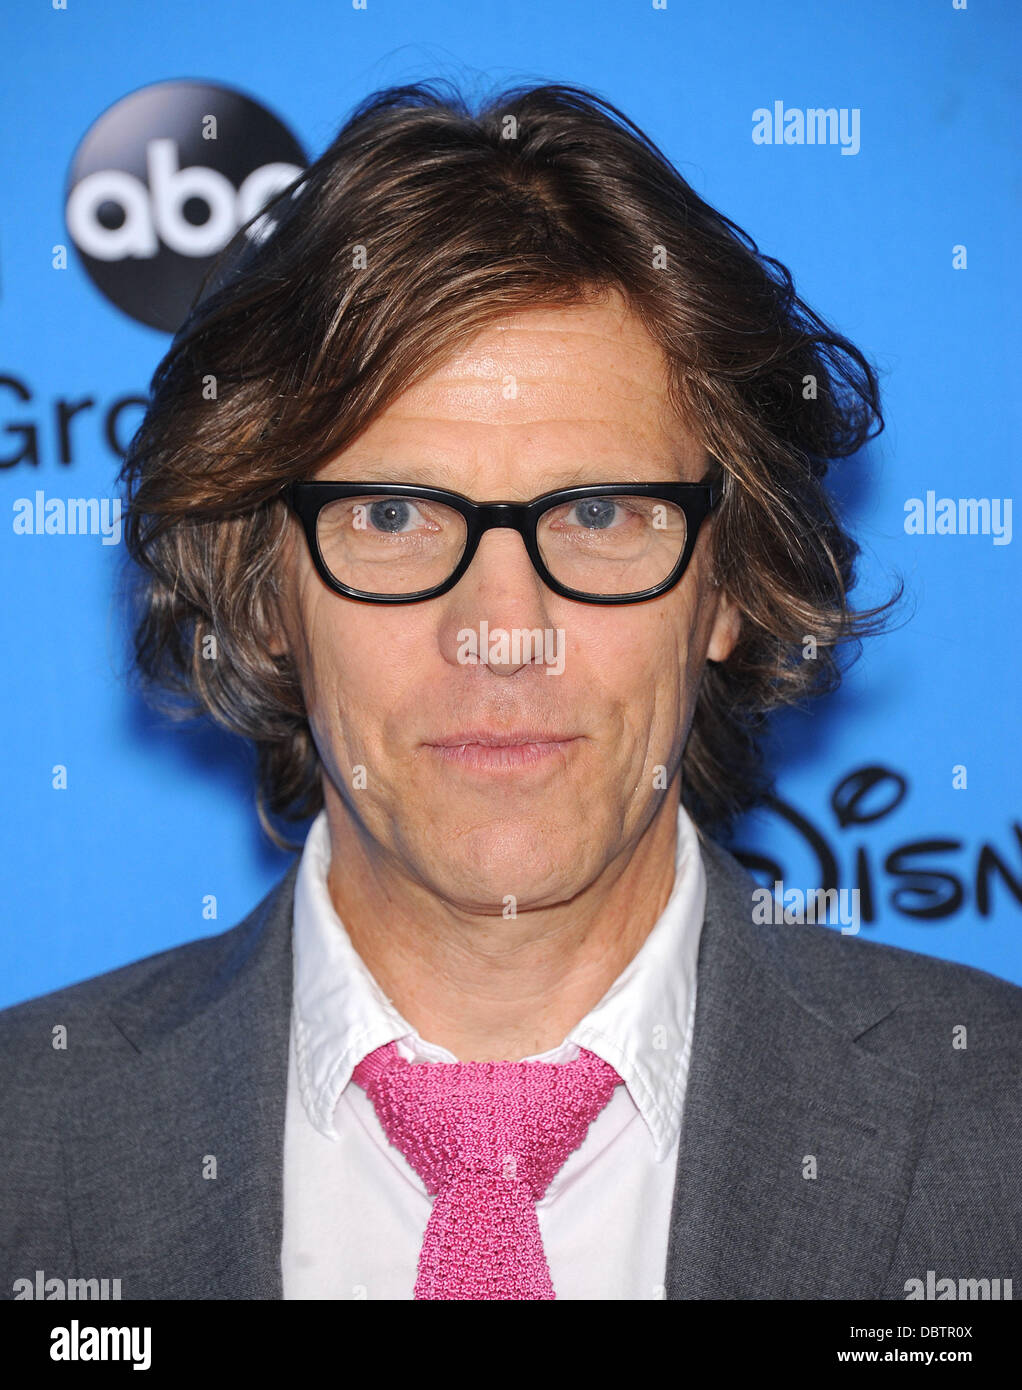 Beverly Hills, California, USA. 4th Aug, 2013. Simon Templeman arrives for the ABC All Star Summer TCA Party 2013 at the Hilton Hotel. Credit:  Lisa O'Connor/ZUMAPRESS.com/Alamy Live News Stock Photo